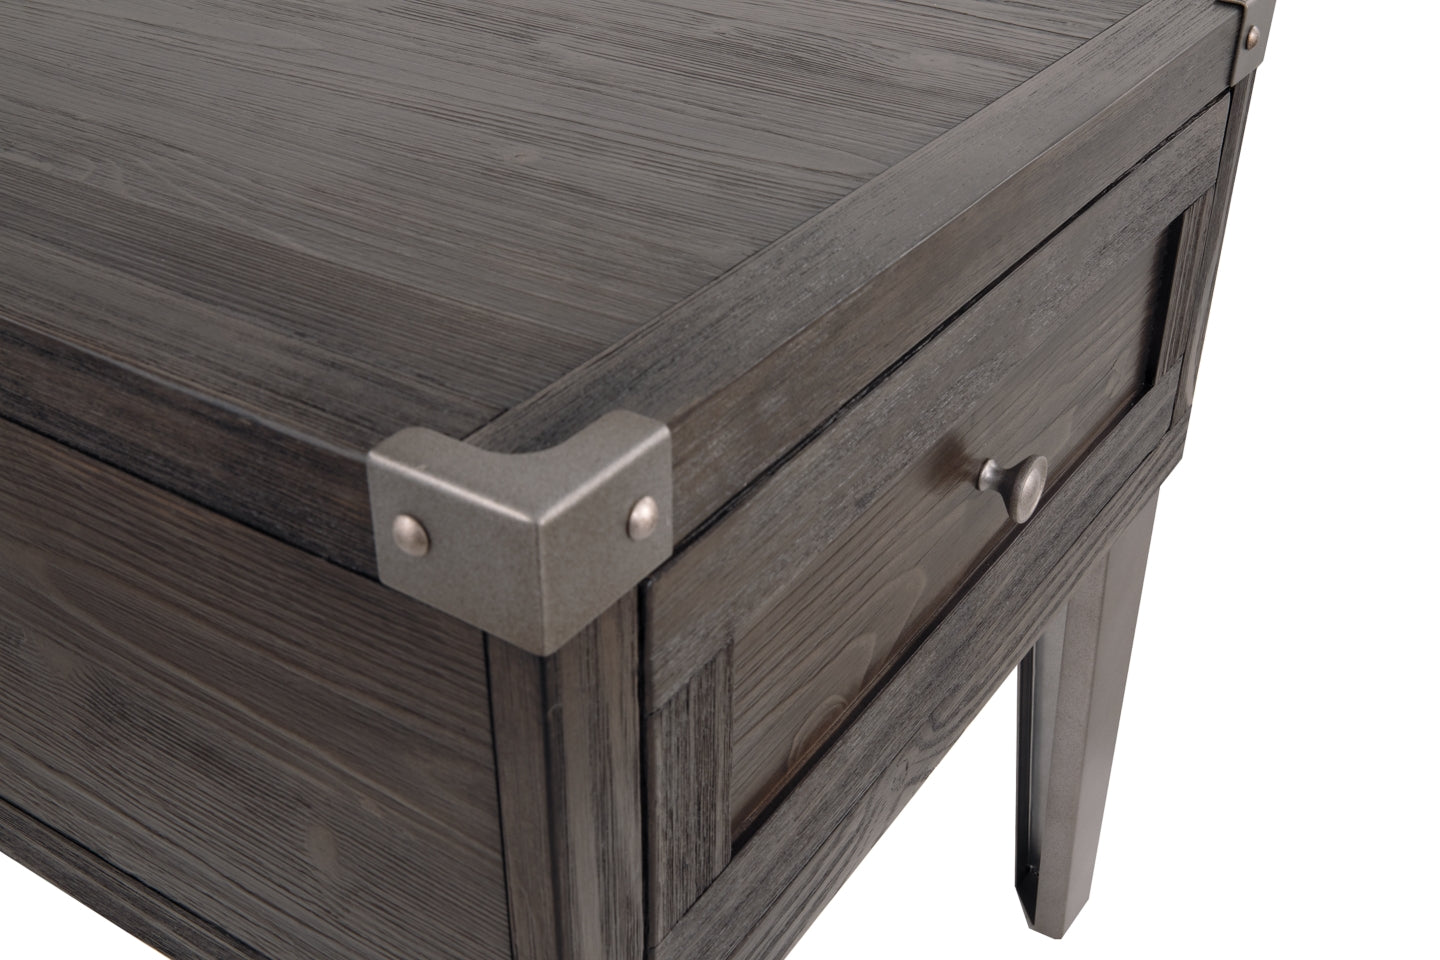 Todoe End Table with USB Ports & Outlets - furniture place usa